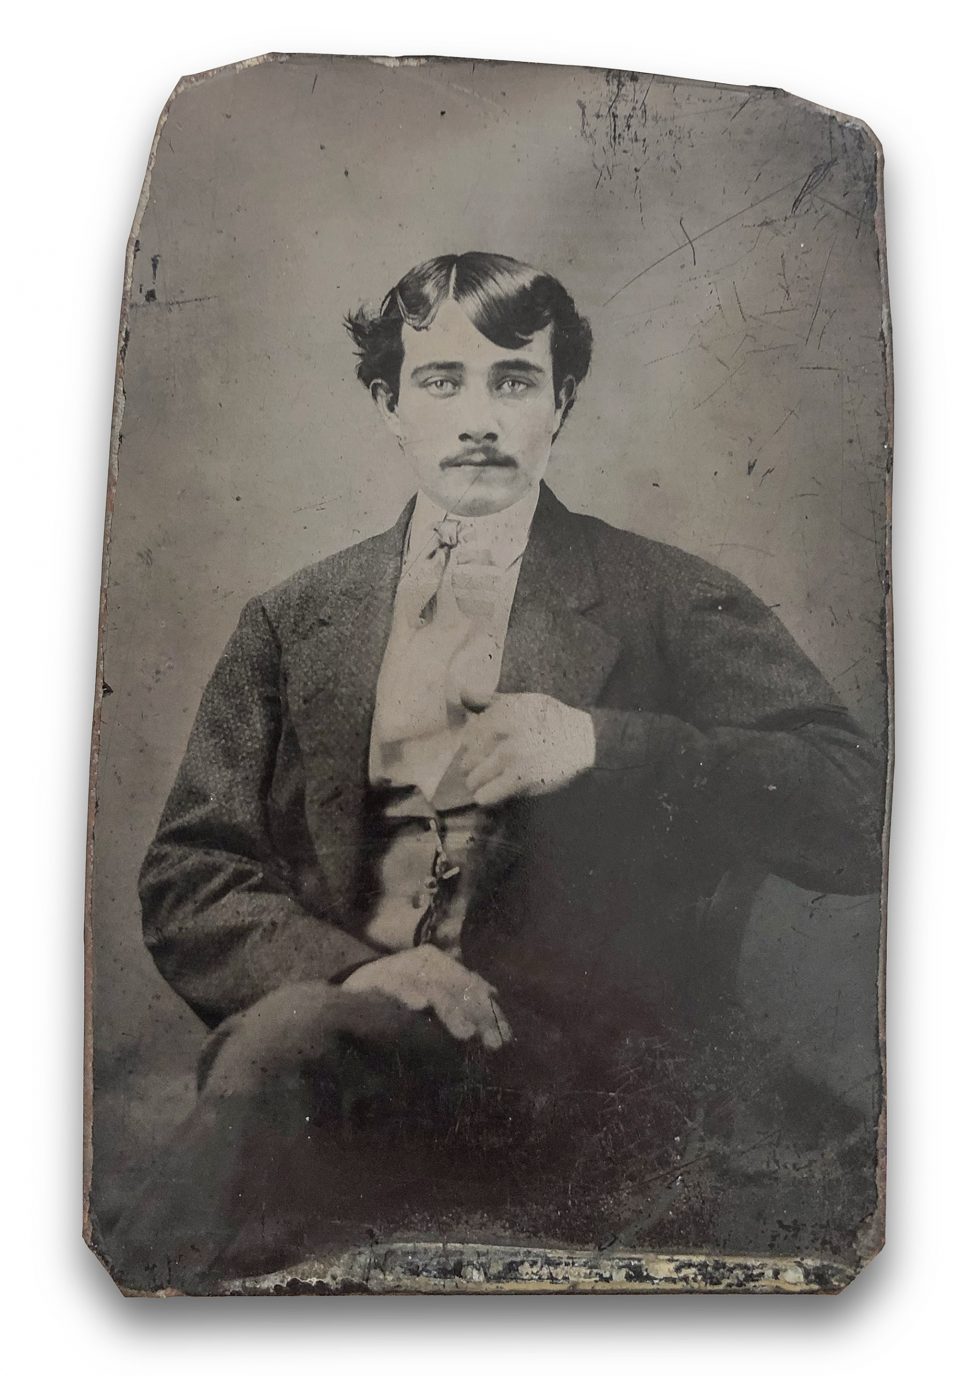 Tintype portrait of a handsome blue-eyed young man probably made in the 1850s or 1860s, the heyday of tintype use.